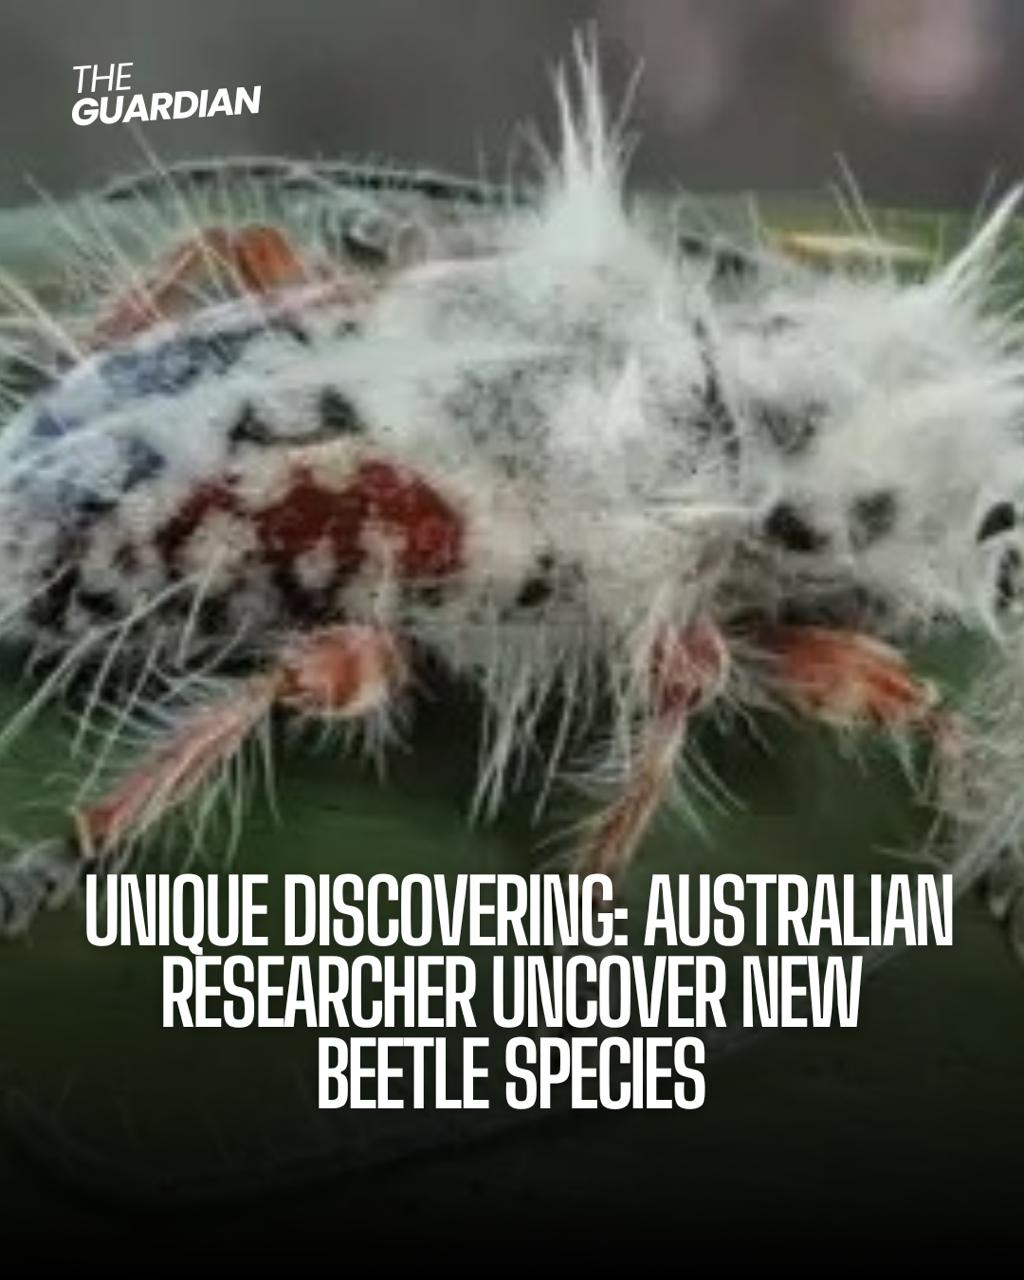 What's red, black, and hairy all over? A recent species of bug found in Australia, dubbed by a few as a "punk beetle" for its fuzzy white locks.